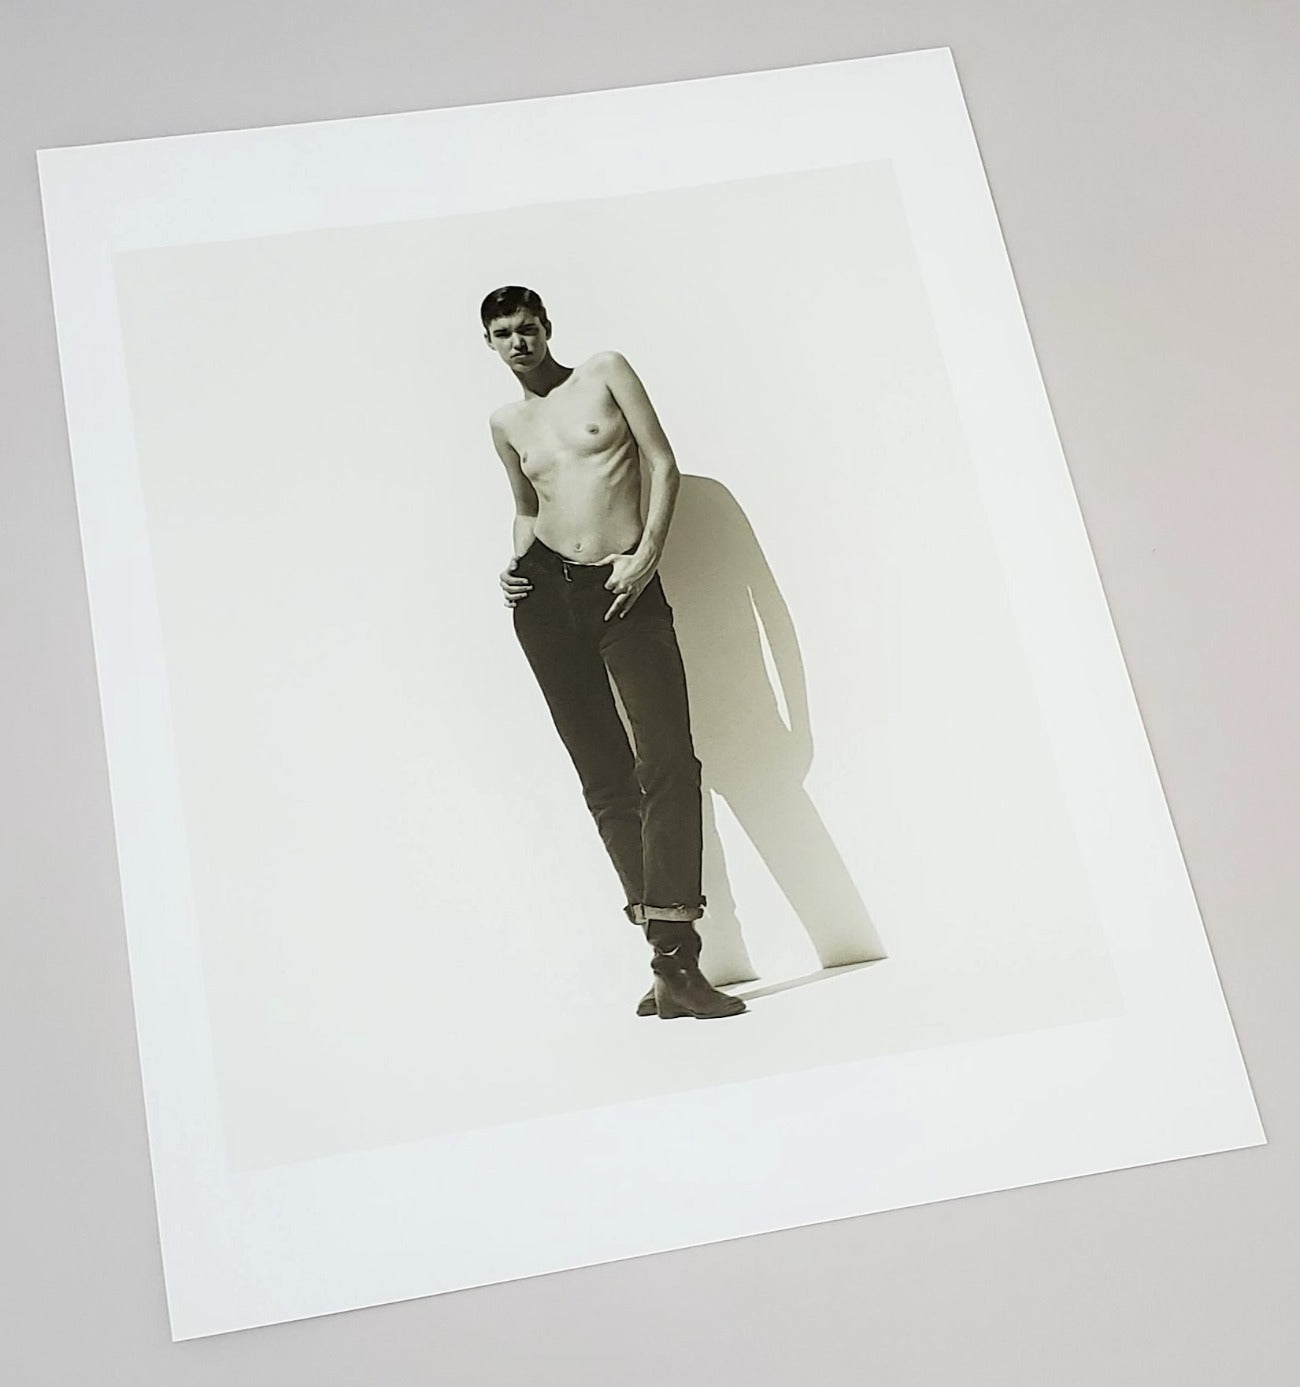 Original Herb Ritts photograph page featured featured in 1998 Men/Women book collection 